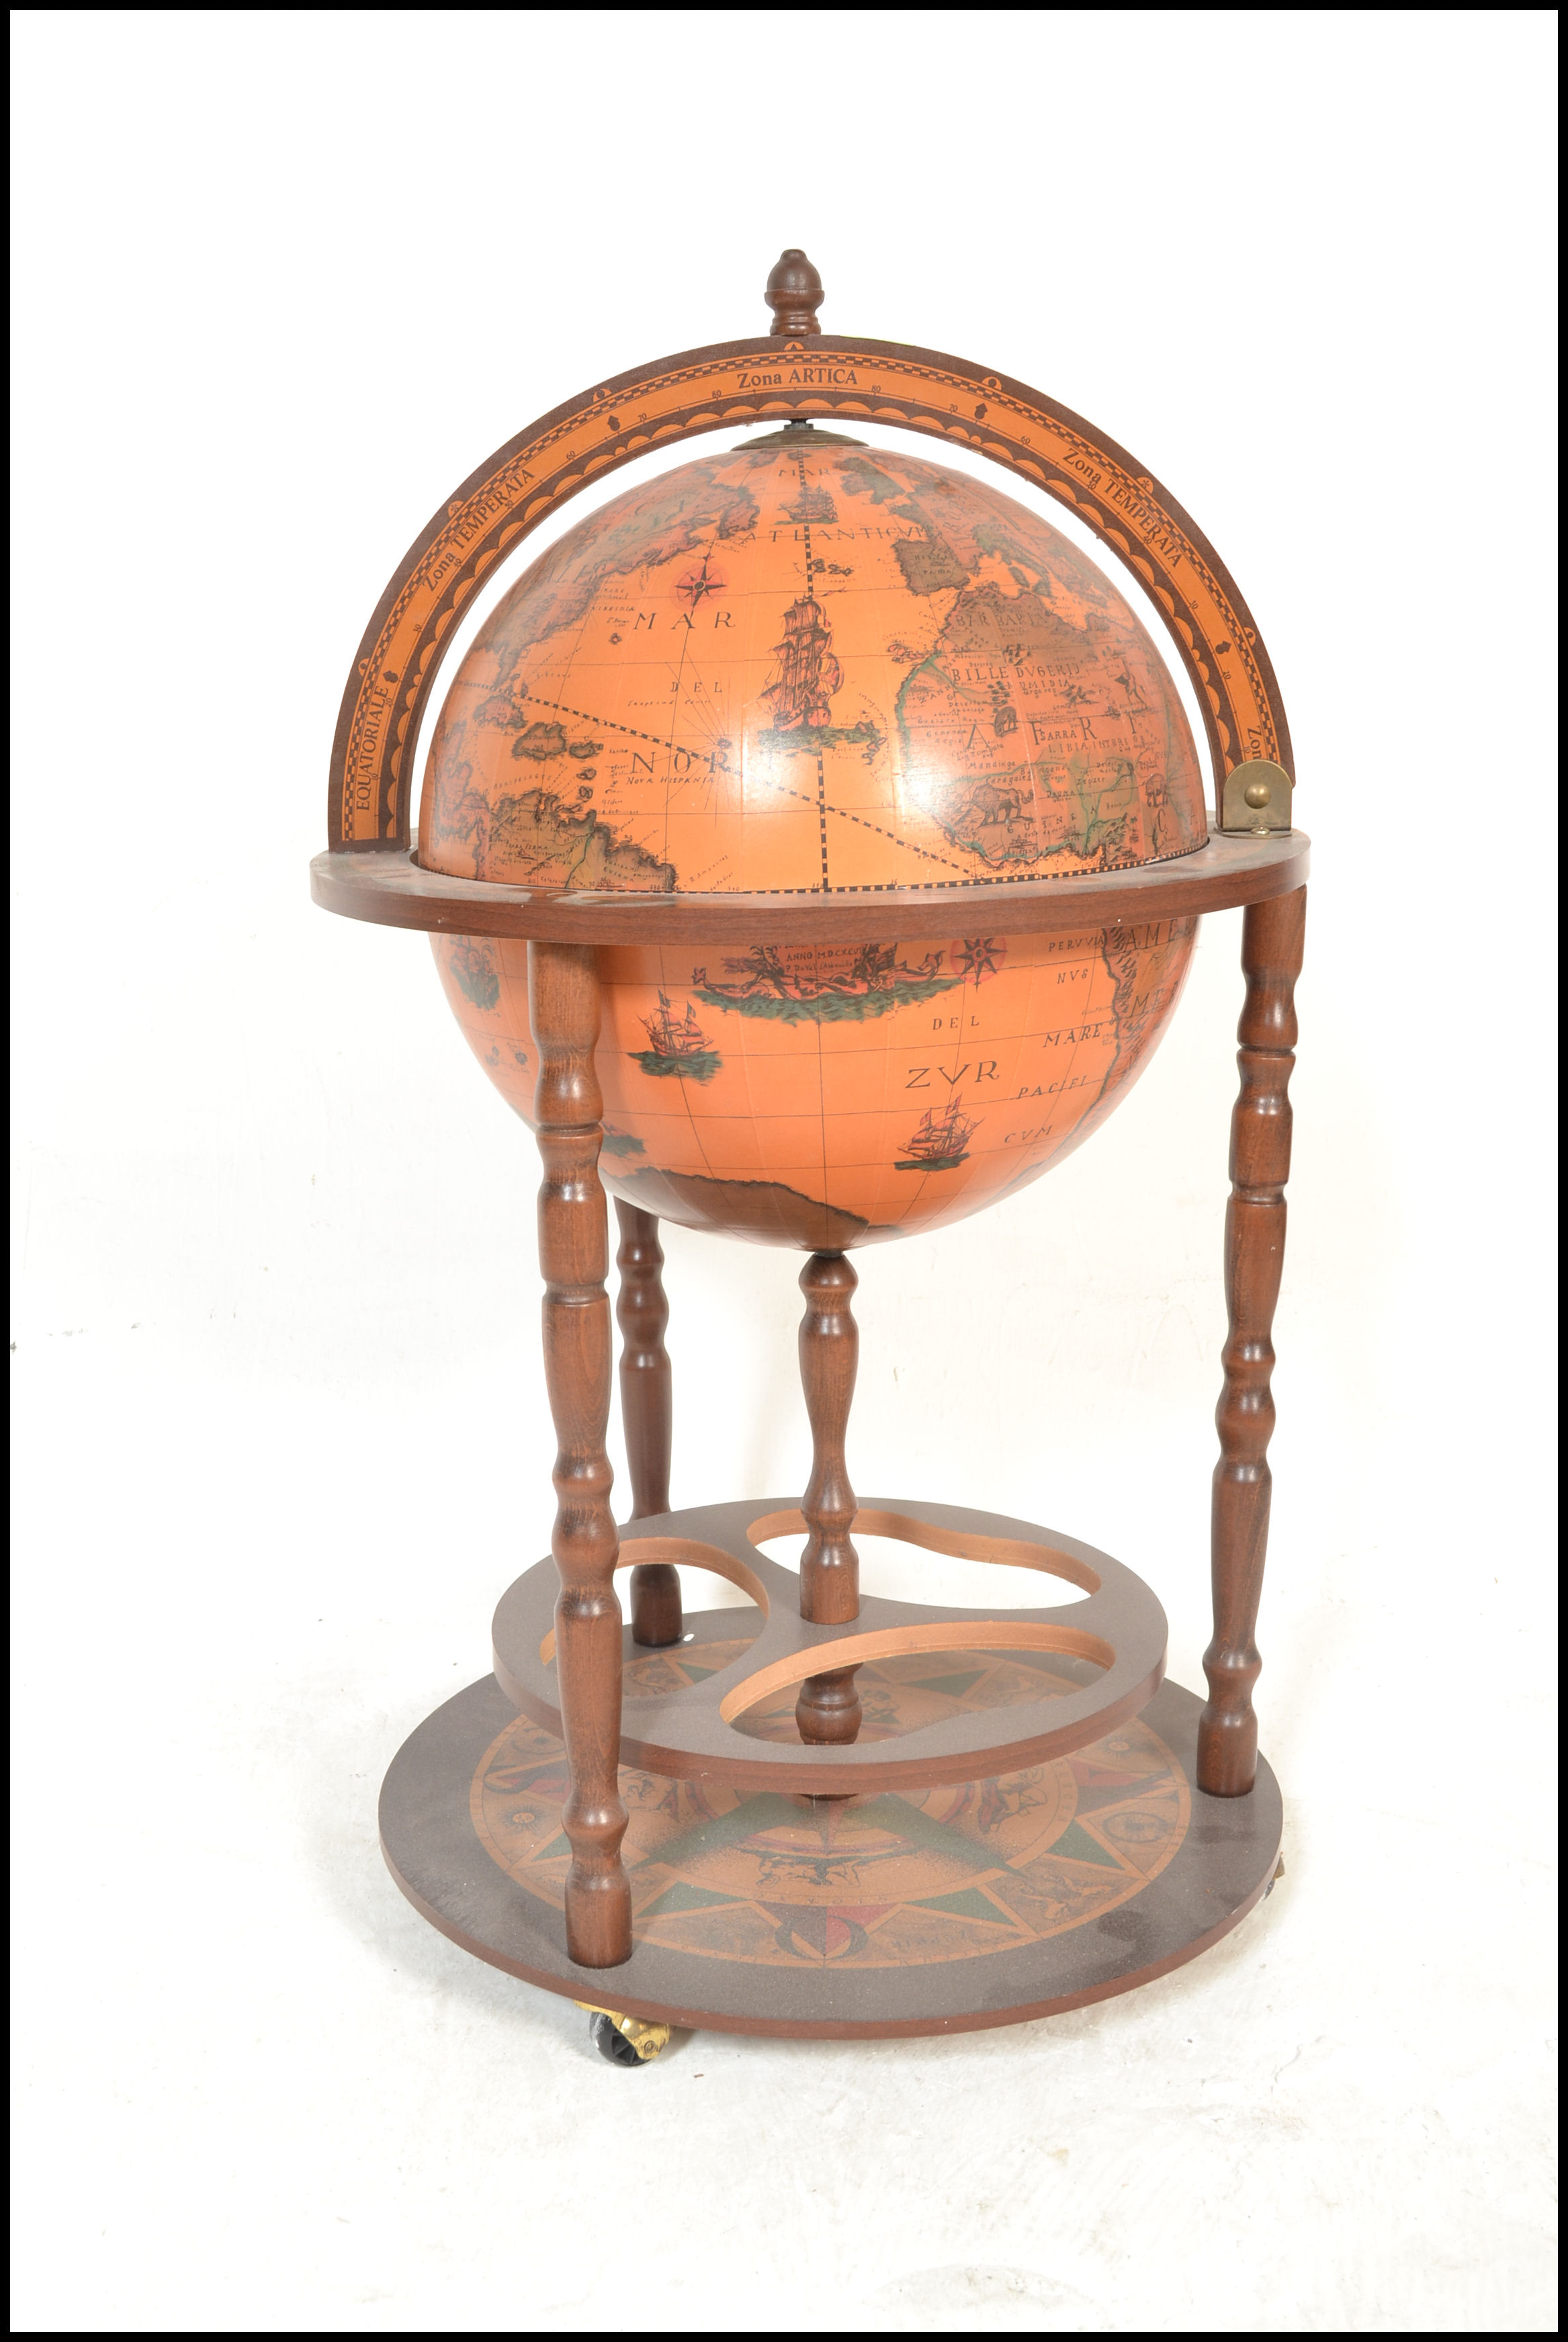 An antique style floor standing cocktail drinks cabinet in the form of a terrestrial globe with